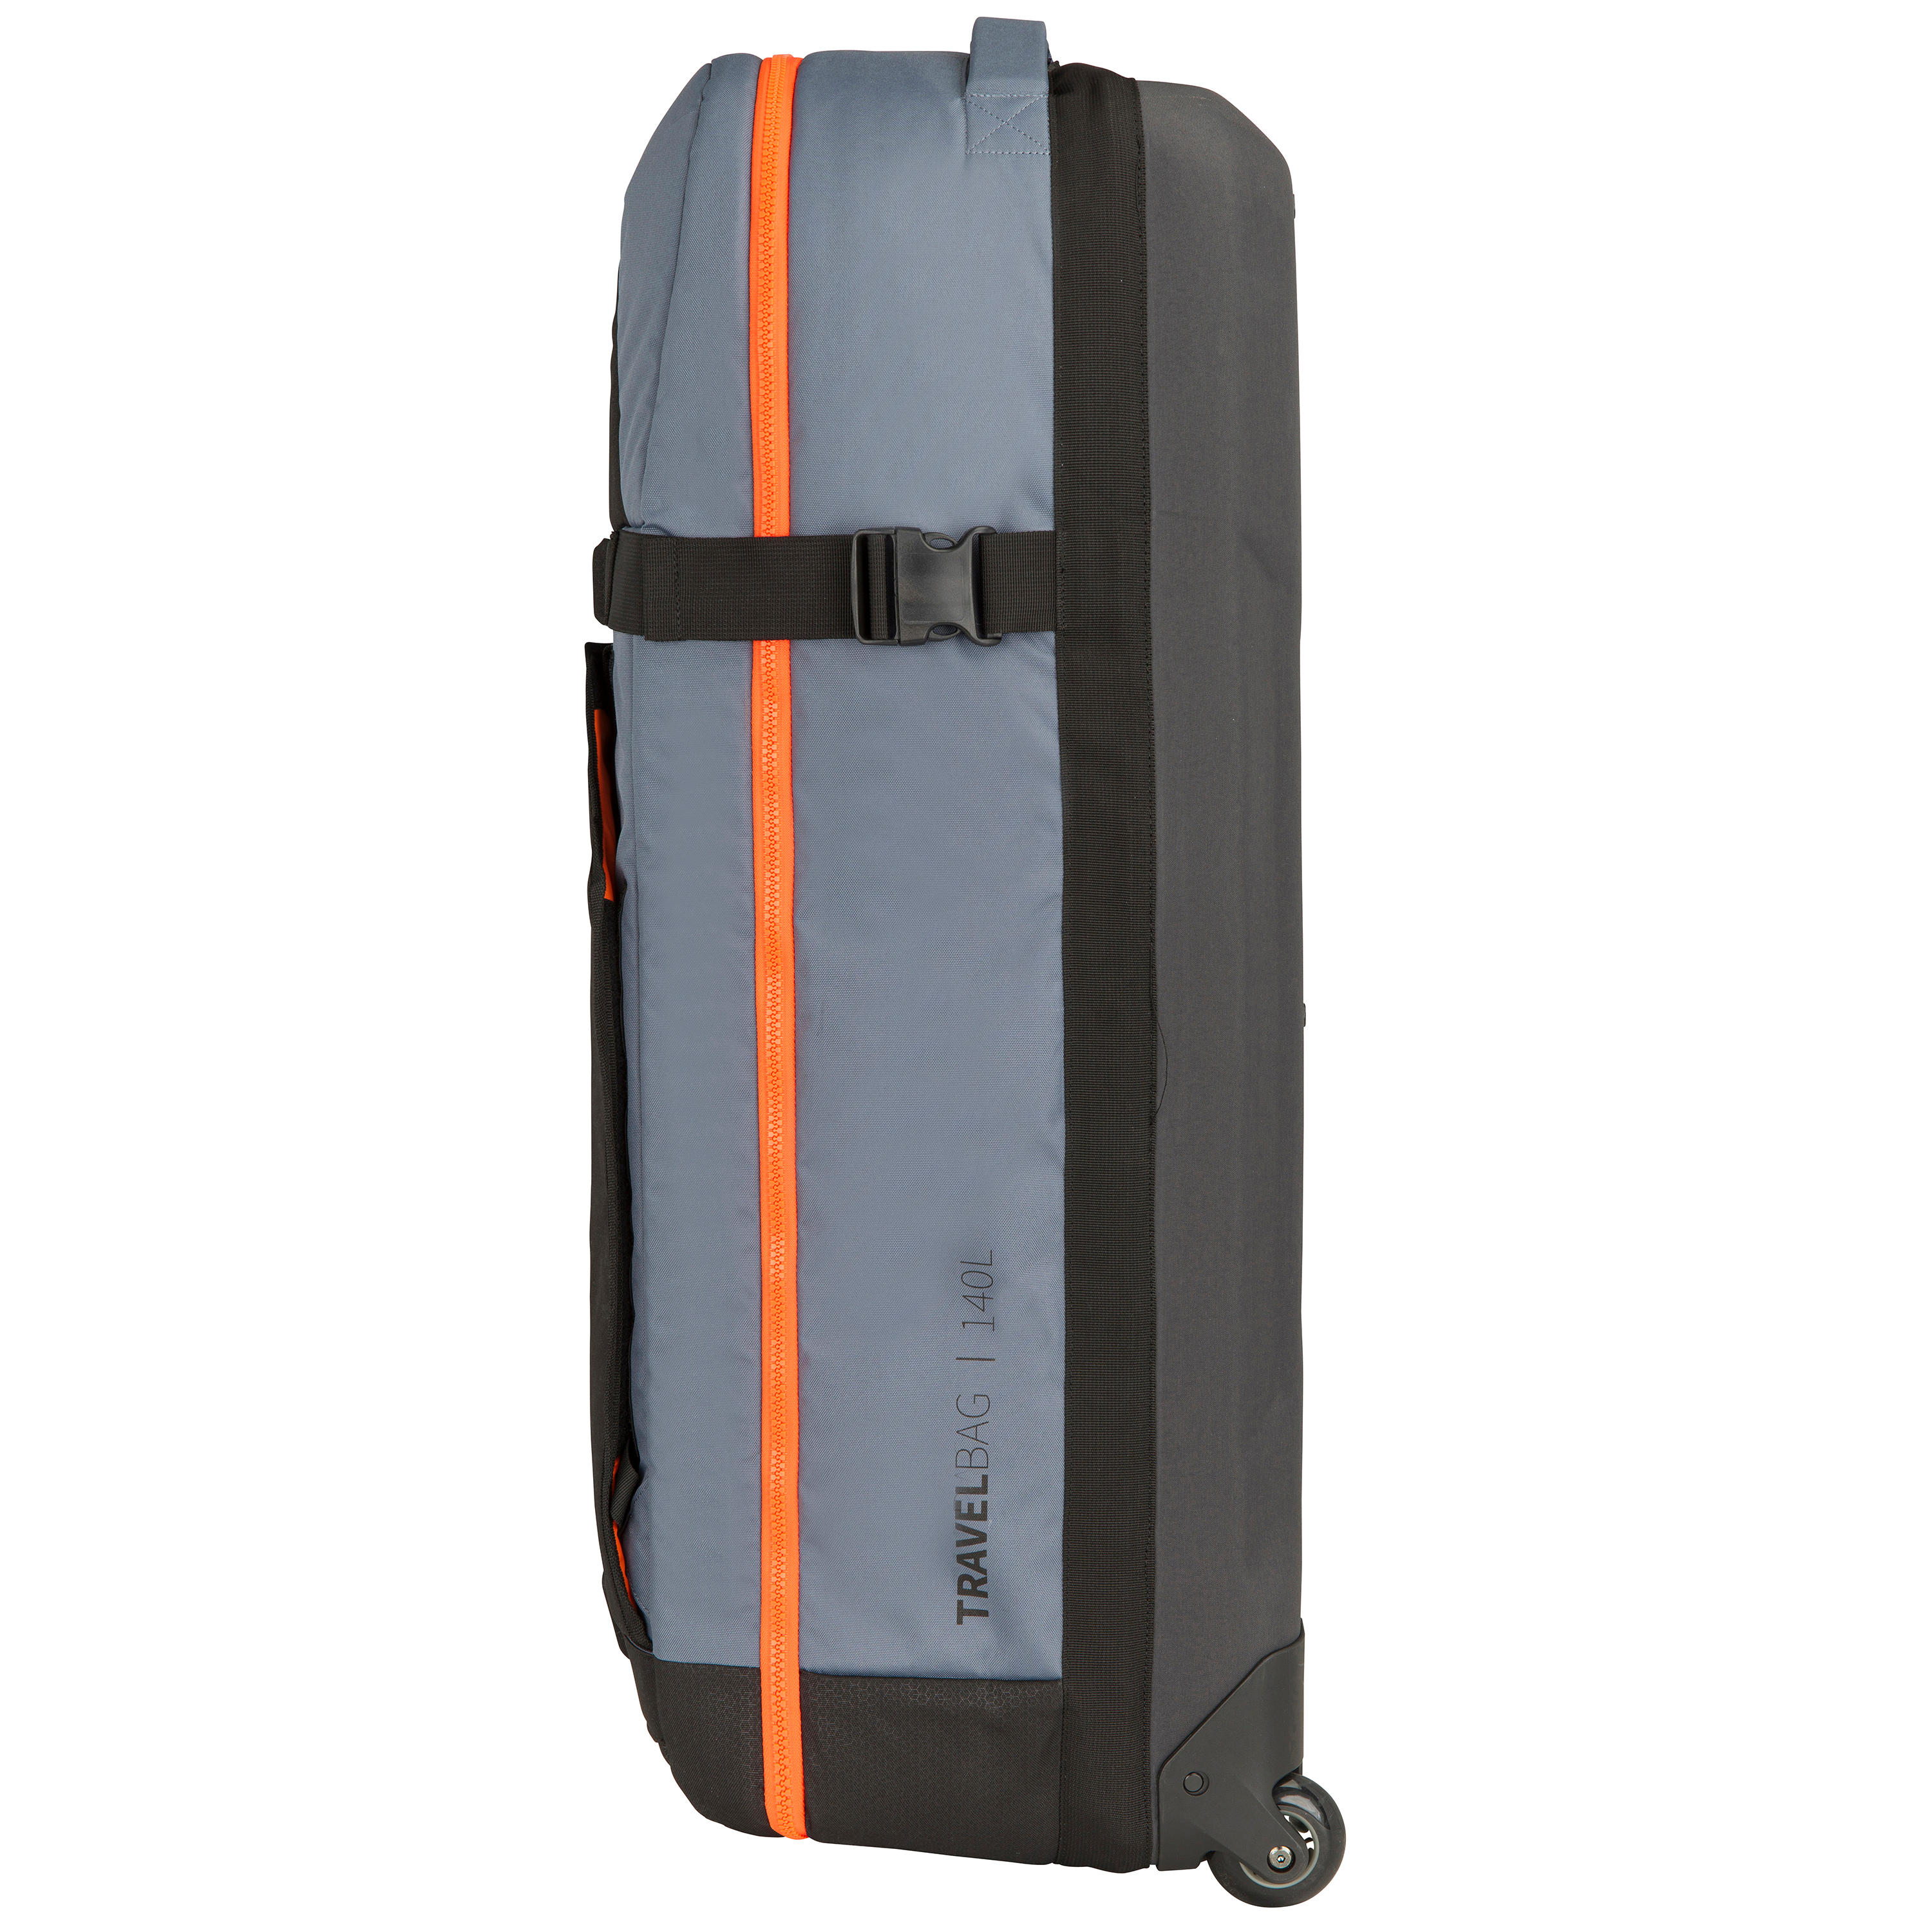 SHELLED TROLLEY TRAVEL BAG 140L FOR TRAVELLER WITH STAND UP PADDLE | STB500 6/21